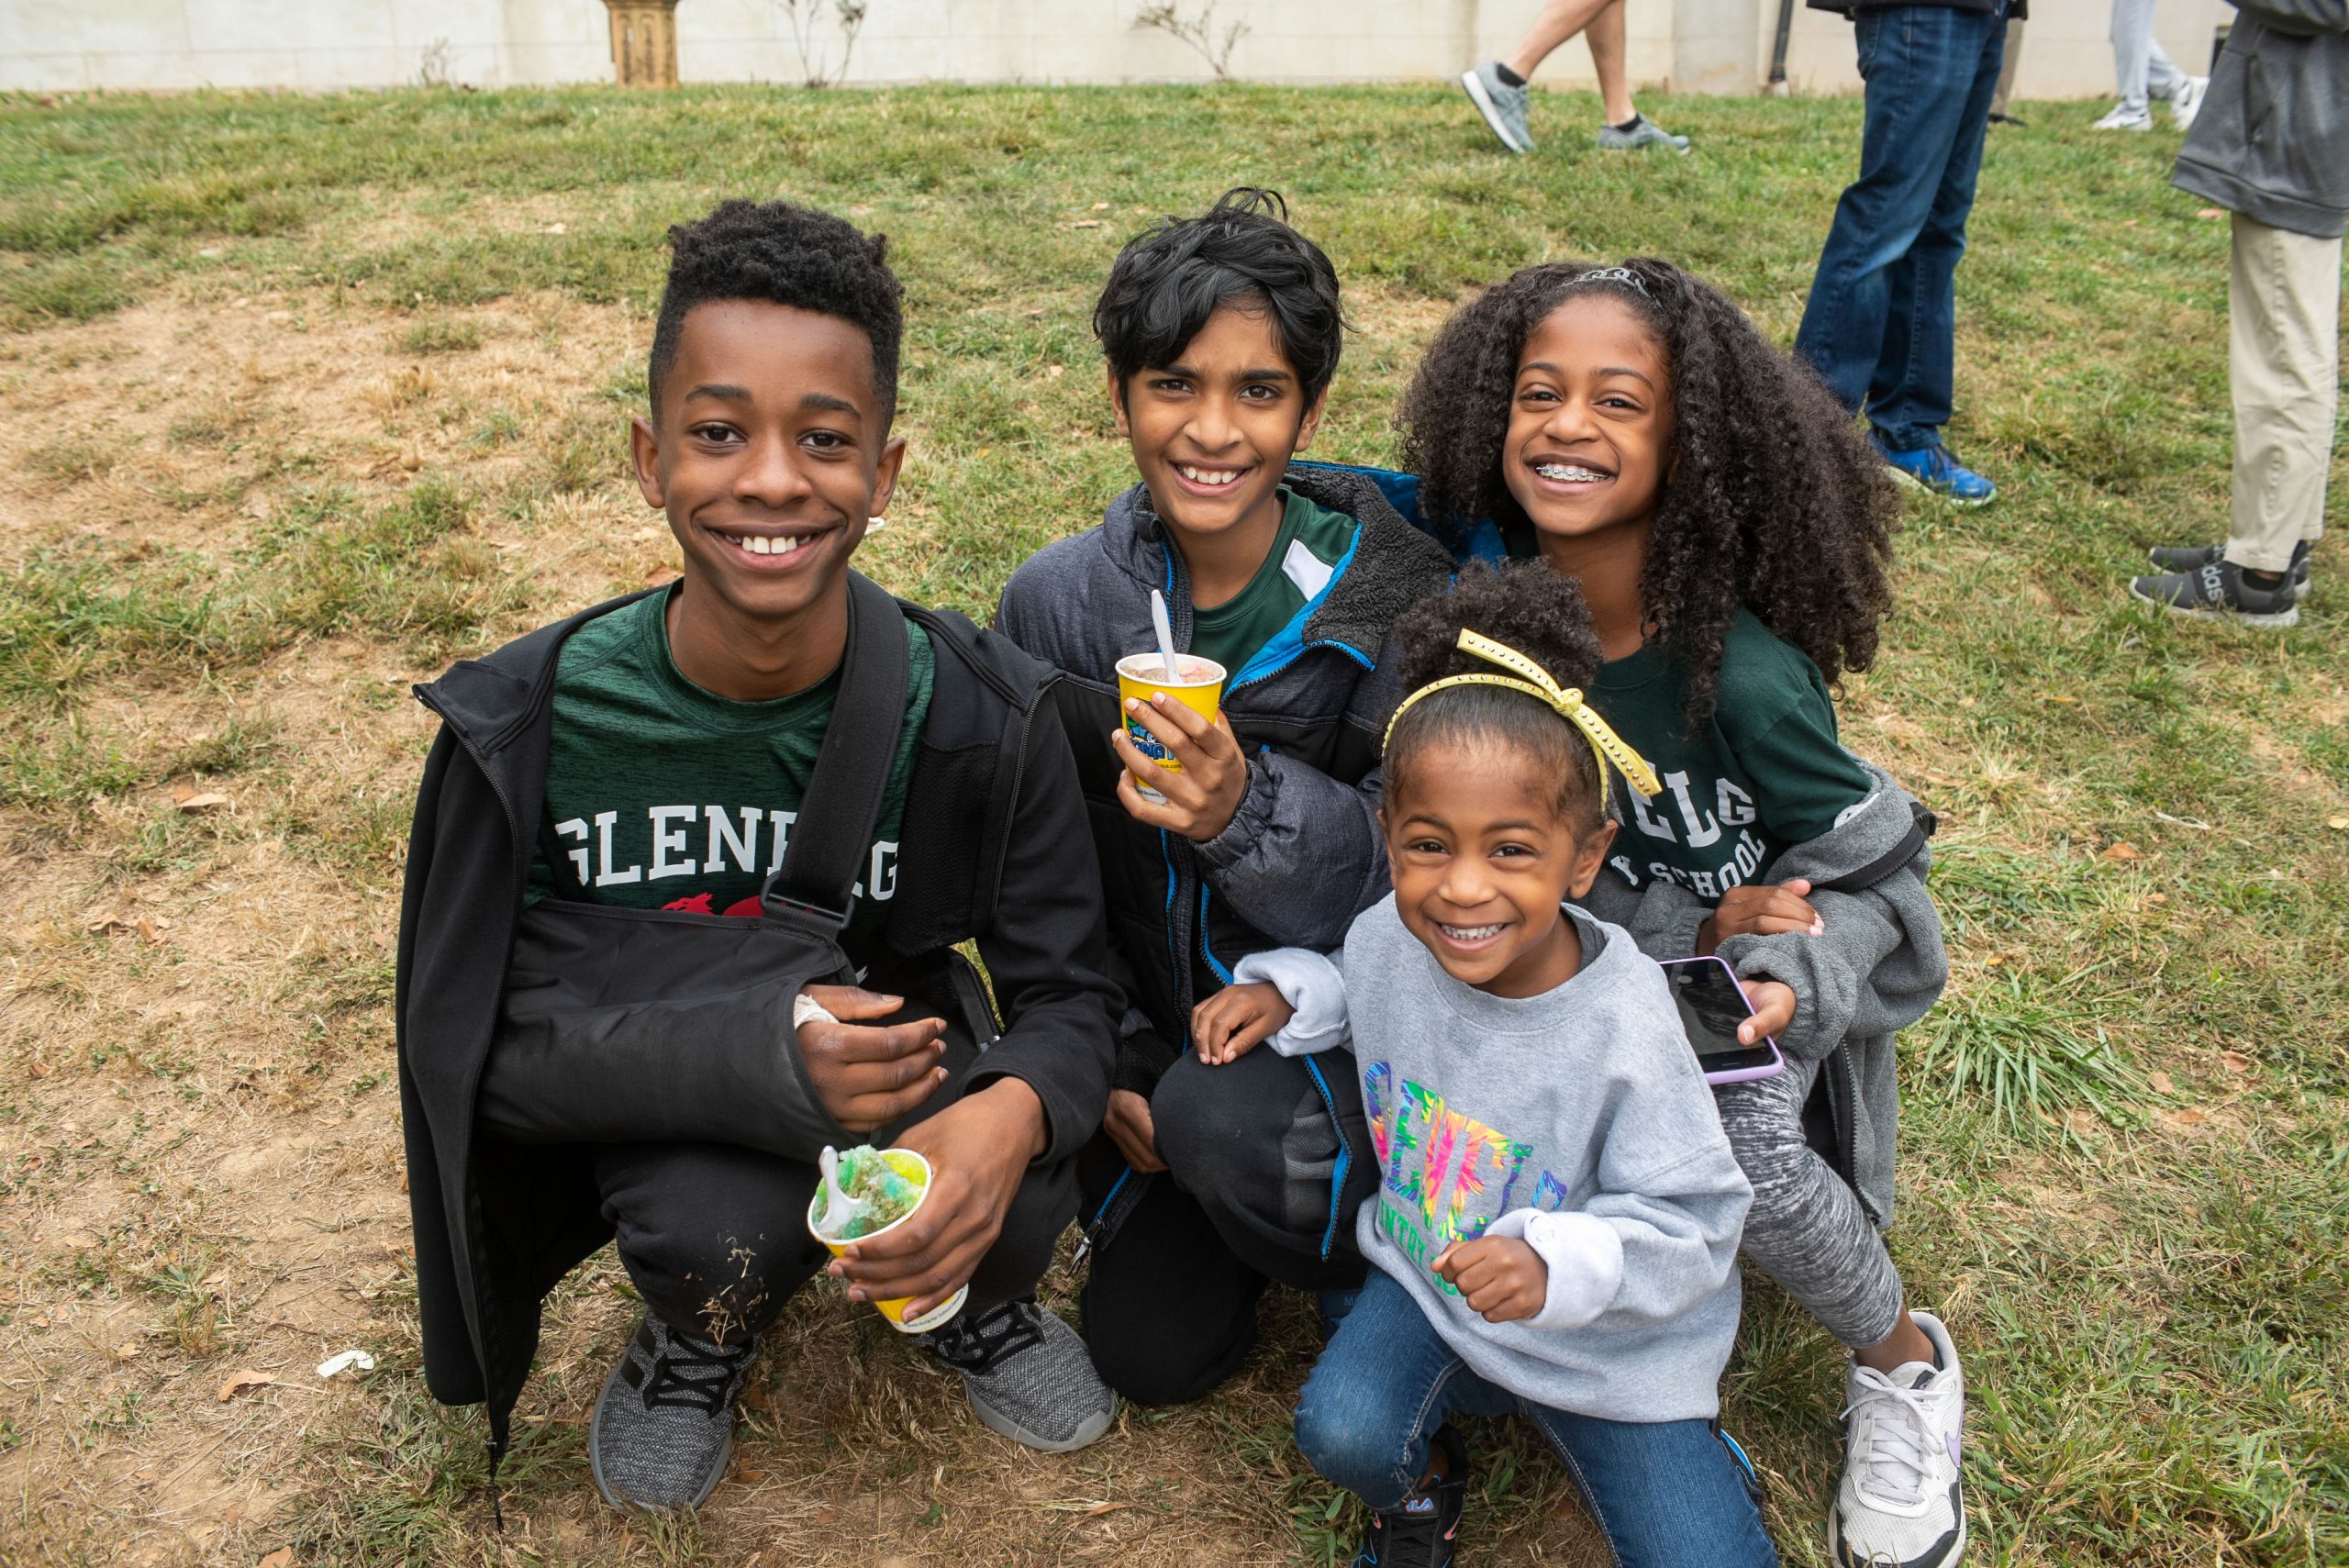 Four students smile at the camera as they sit on the ground enjoying snowballs during Family Day 2022.